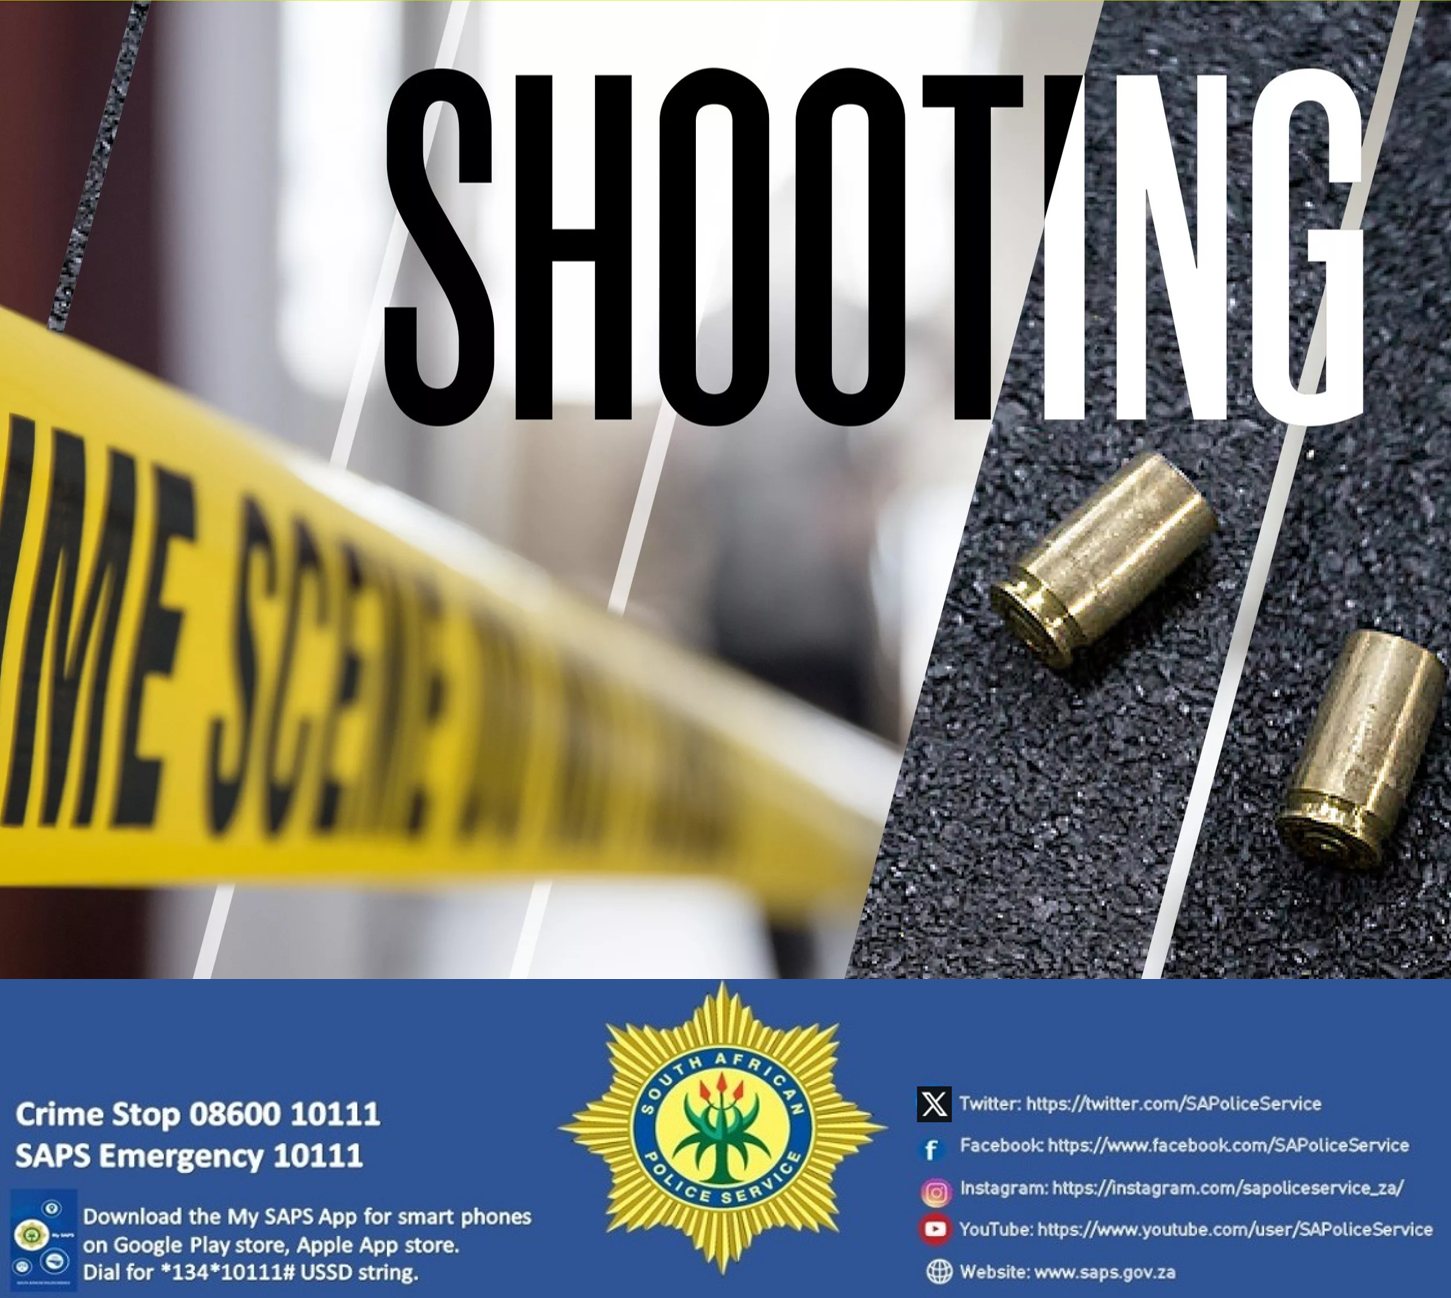 Manhunt launched for suspects following fatal shooting of two men in Thabong